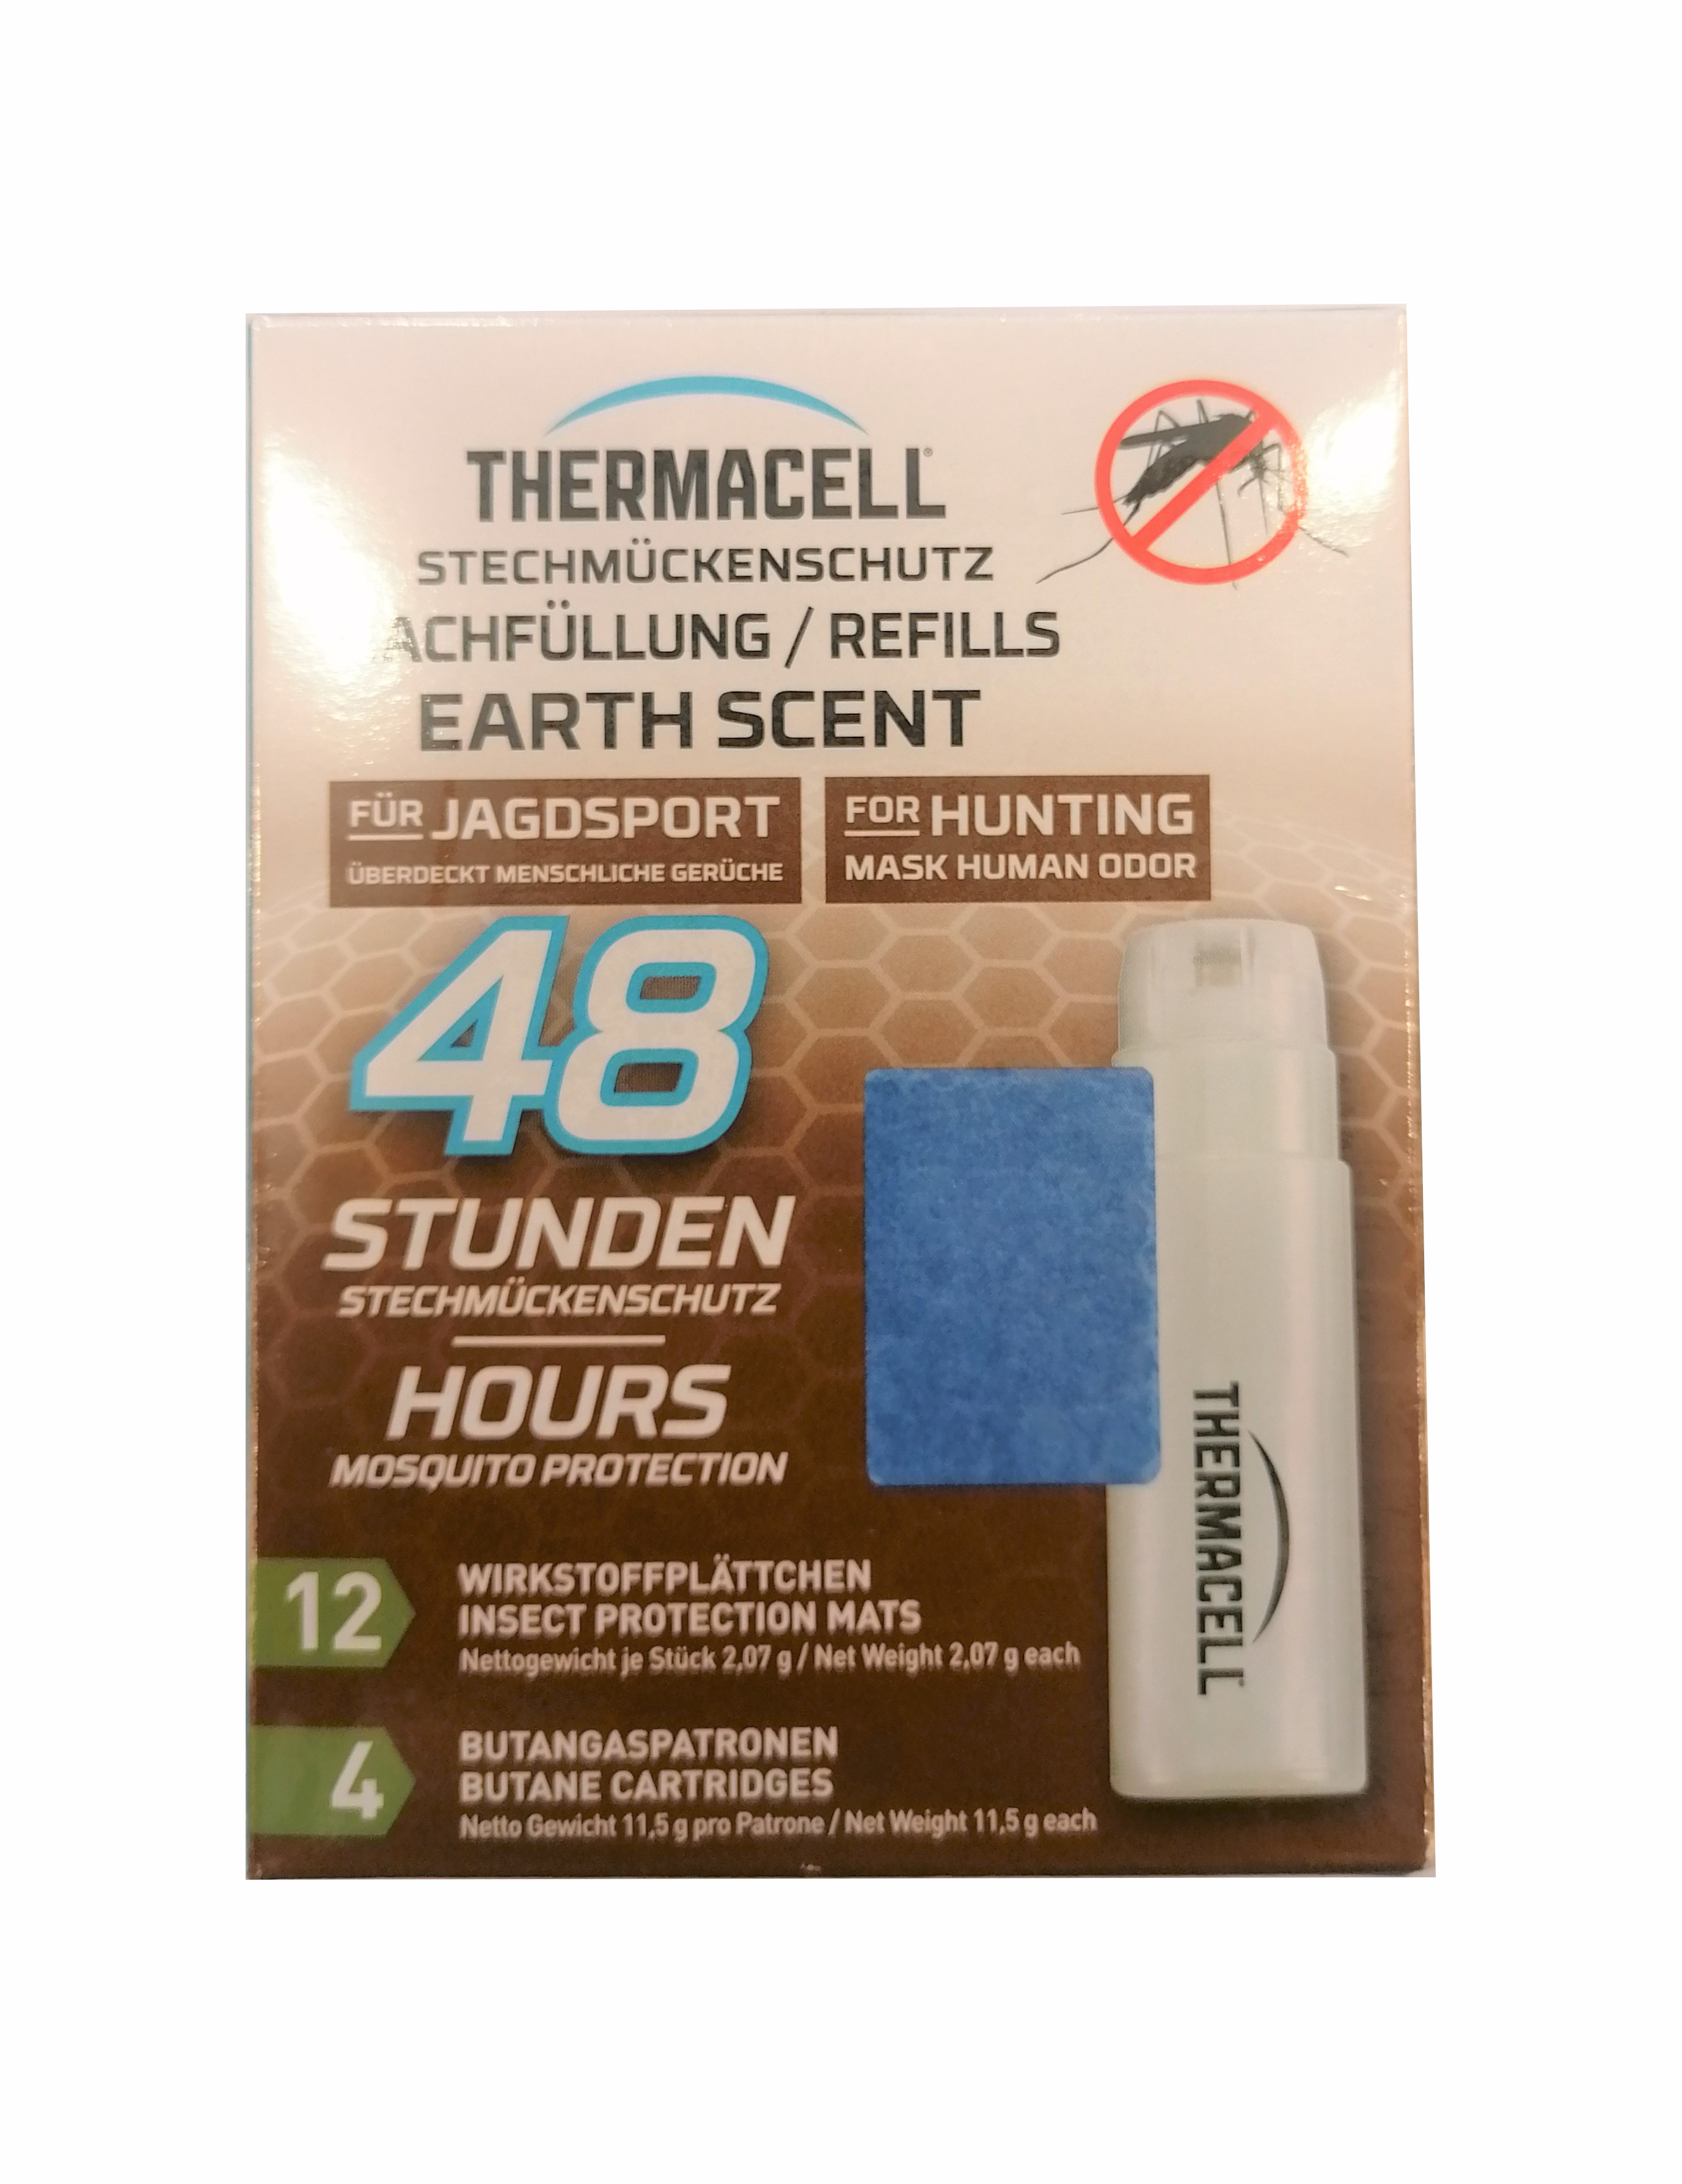 Thermacell E-4 Nachfüllpackung